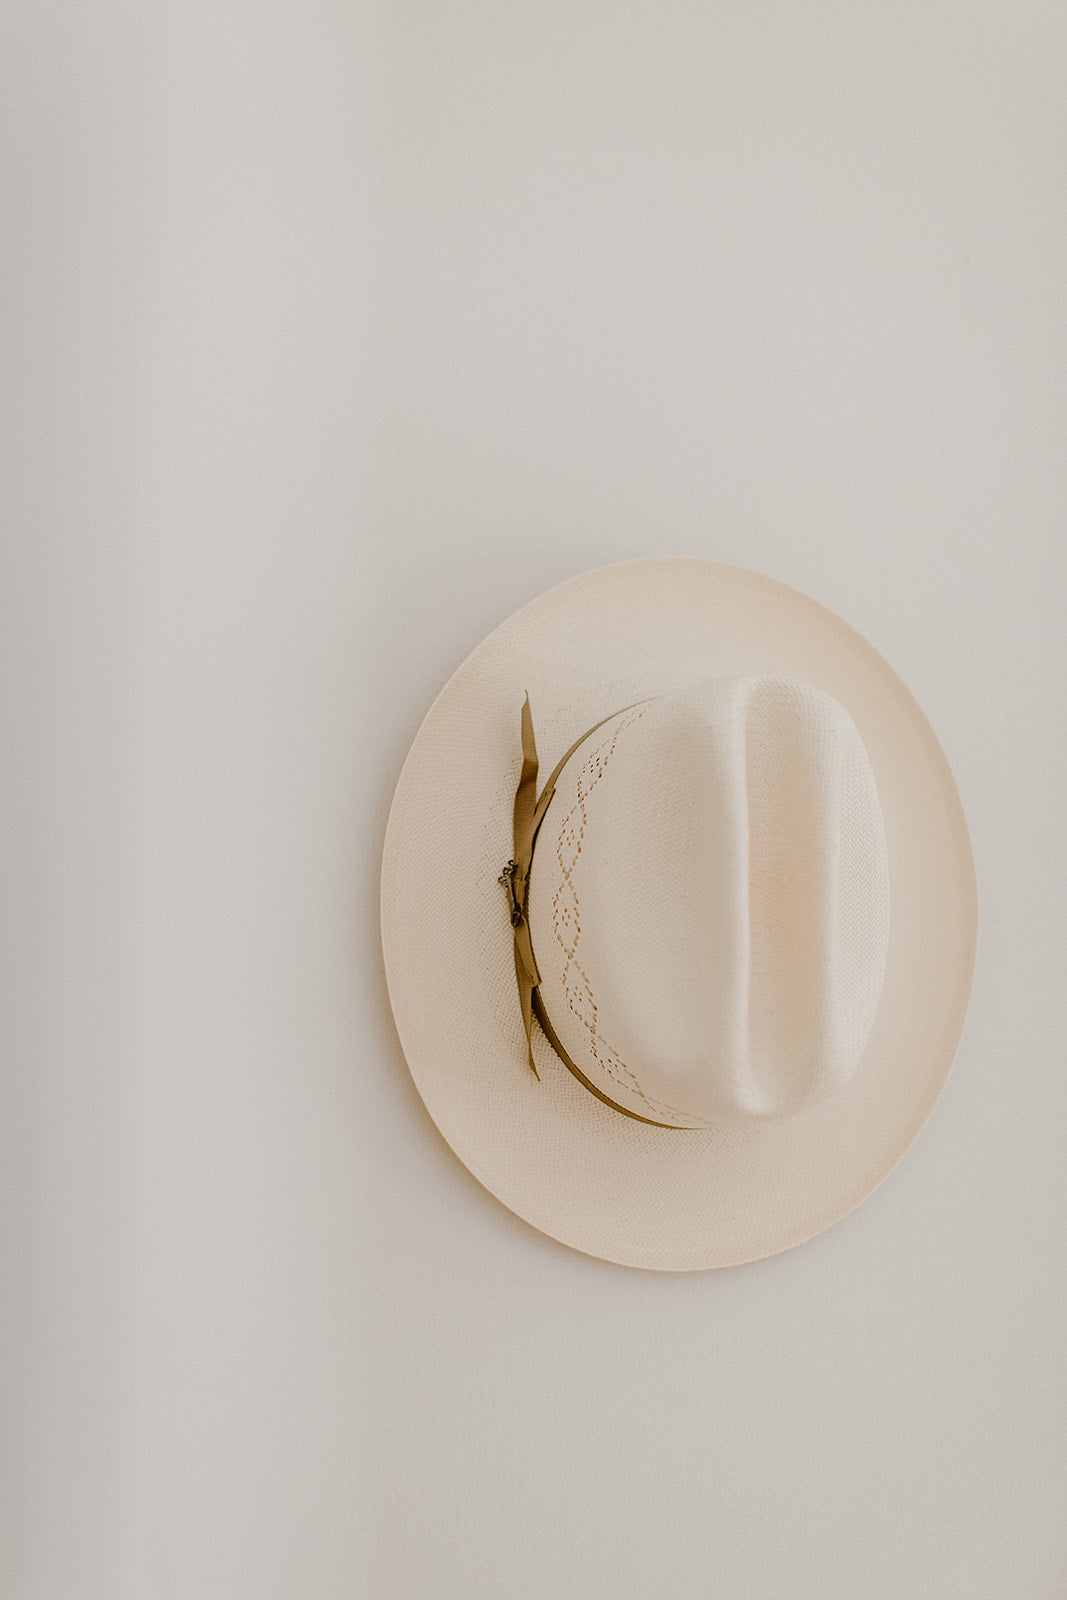 Blond Genius x Stetson - Open Road Hat in Natural/Tan